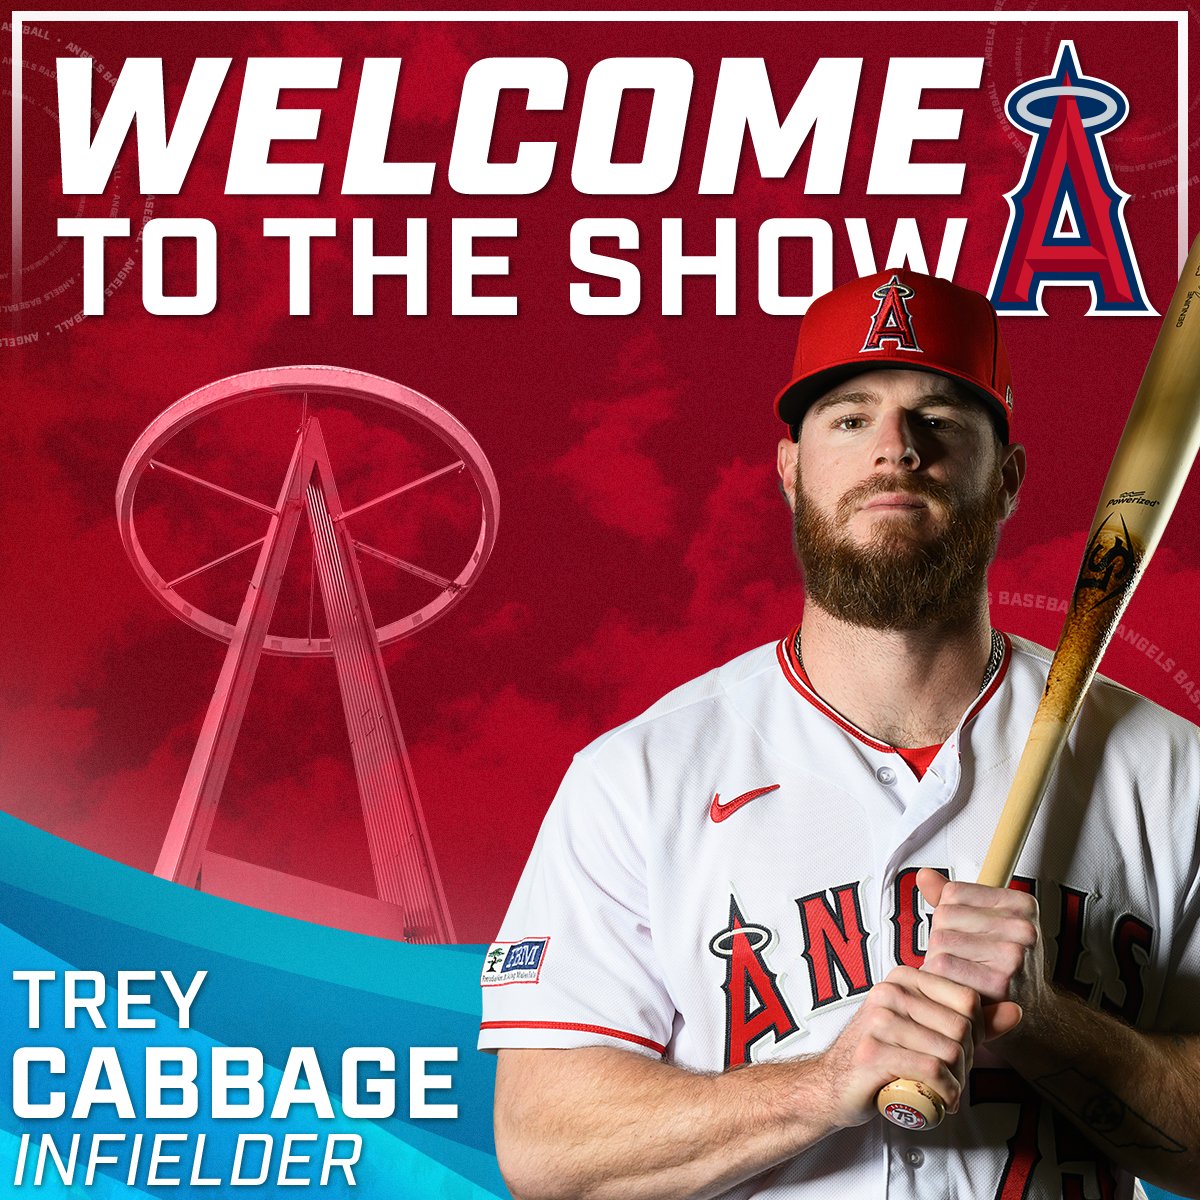 Welcome to the Show, Trey!